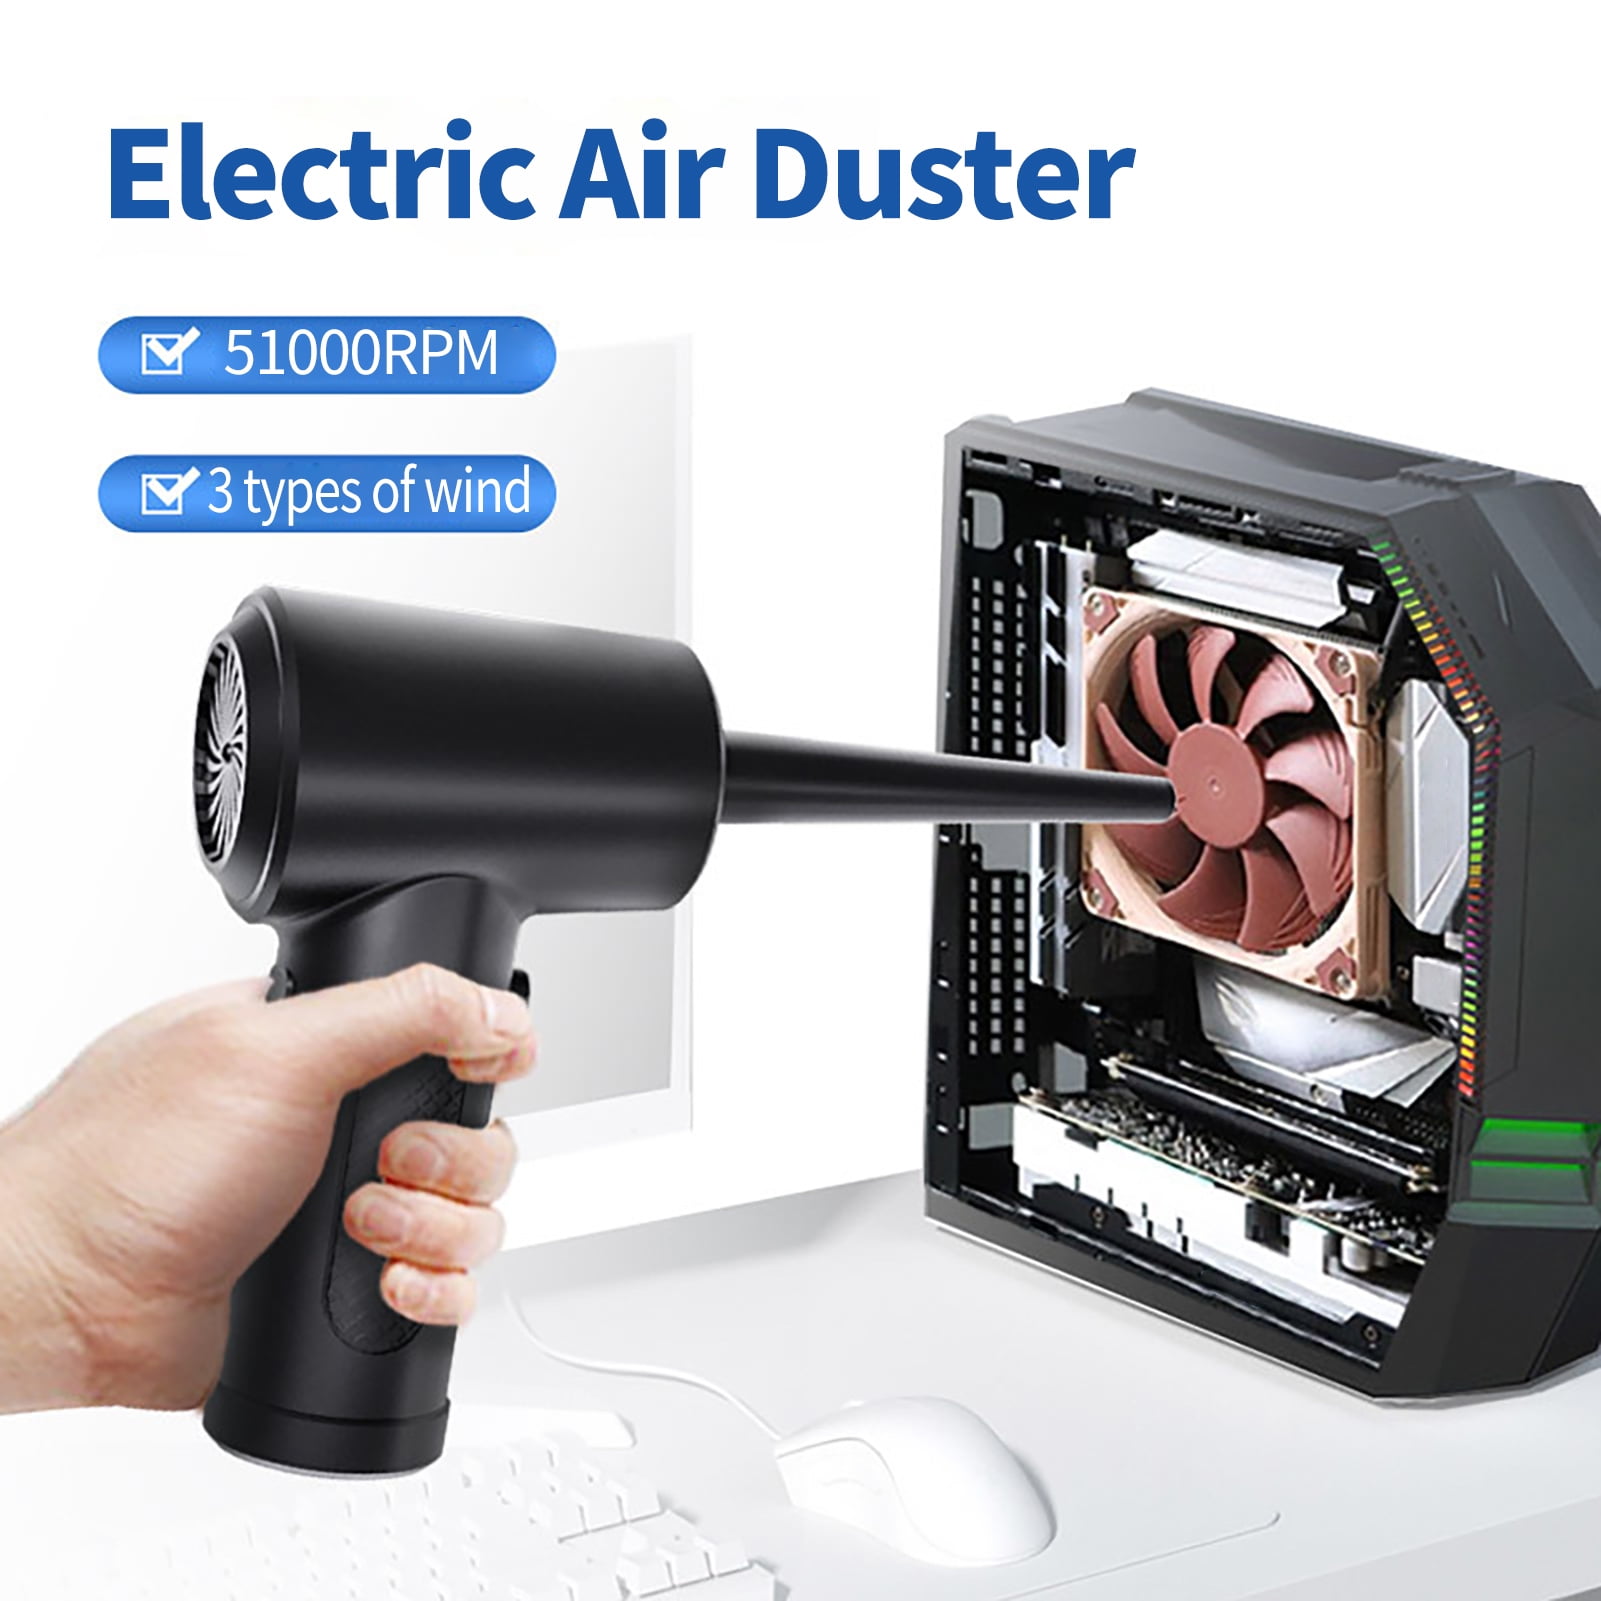  Cordless JetDry Blower, Turbo Fan Blower Gun Electric Air  Duster for Cleaning Computer, Car, Pet House, Fast Charging,Powerful  110000RPM : Everything Else